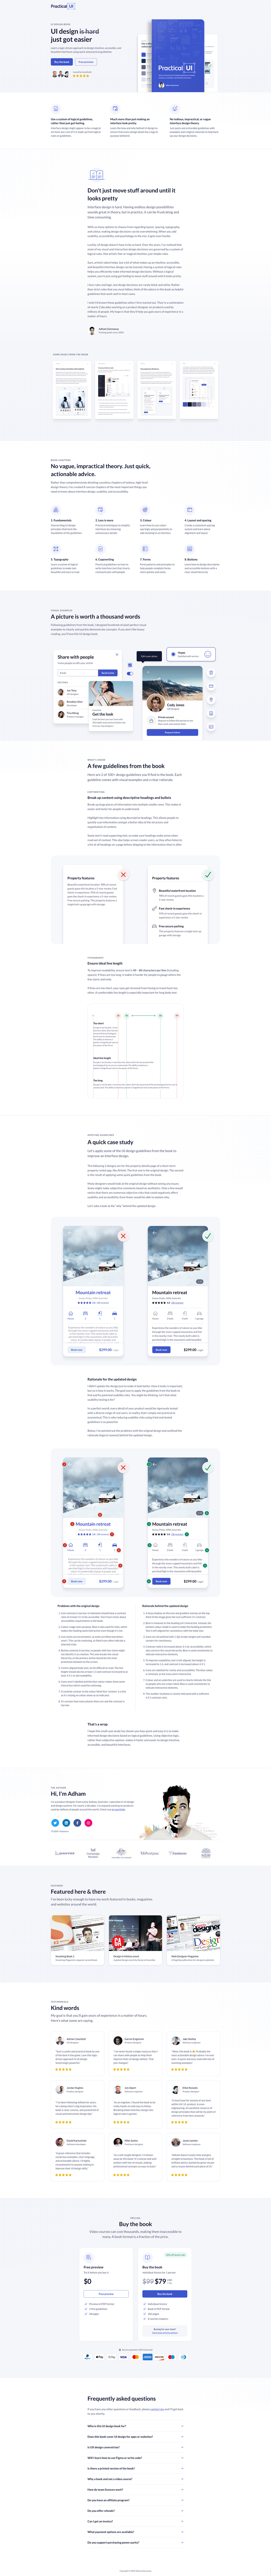 Practical UI Landing Page Example: A UI design book to learn a logic-driven approach to design intuitive, accessible, and beautiful interfaces using quick and practical guidelines.